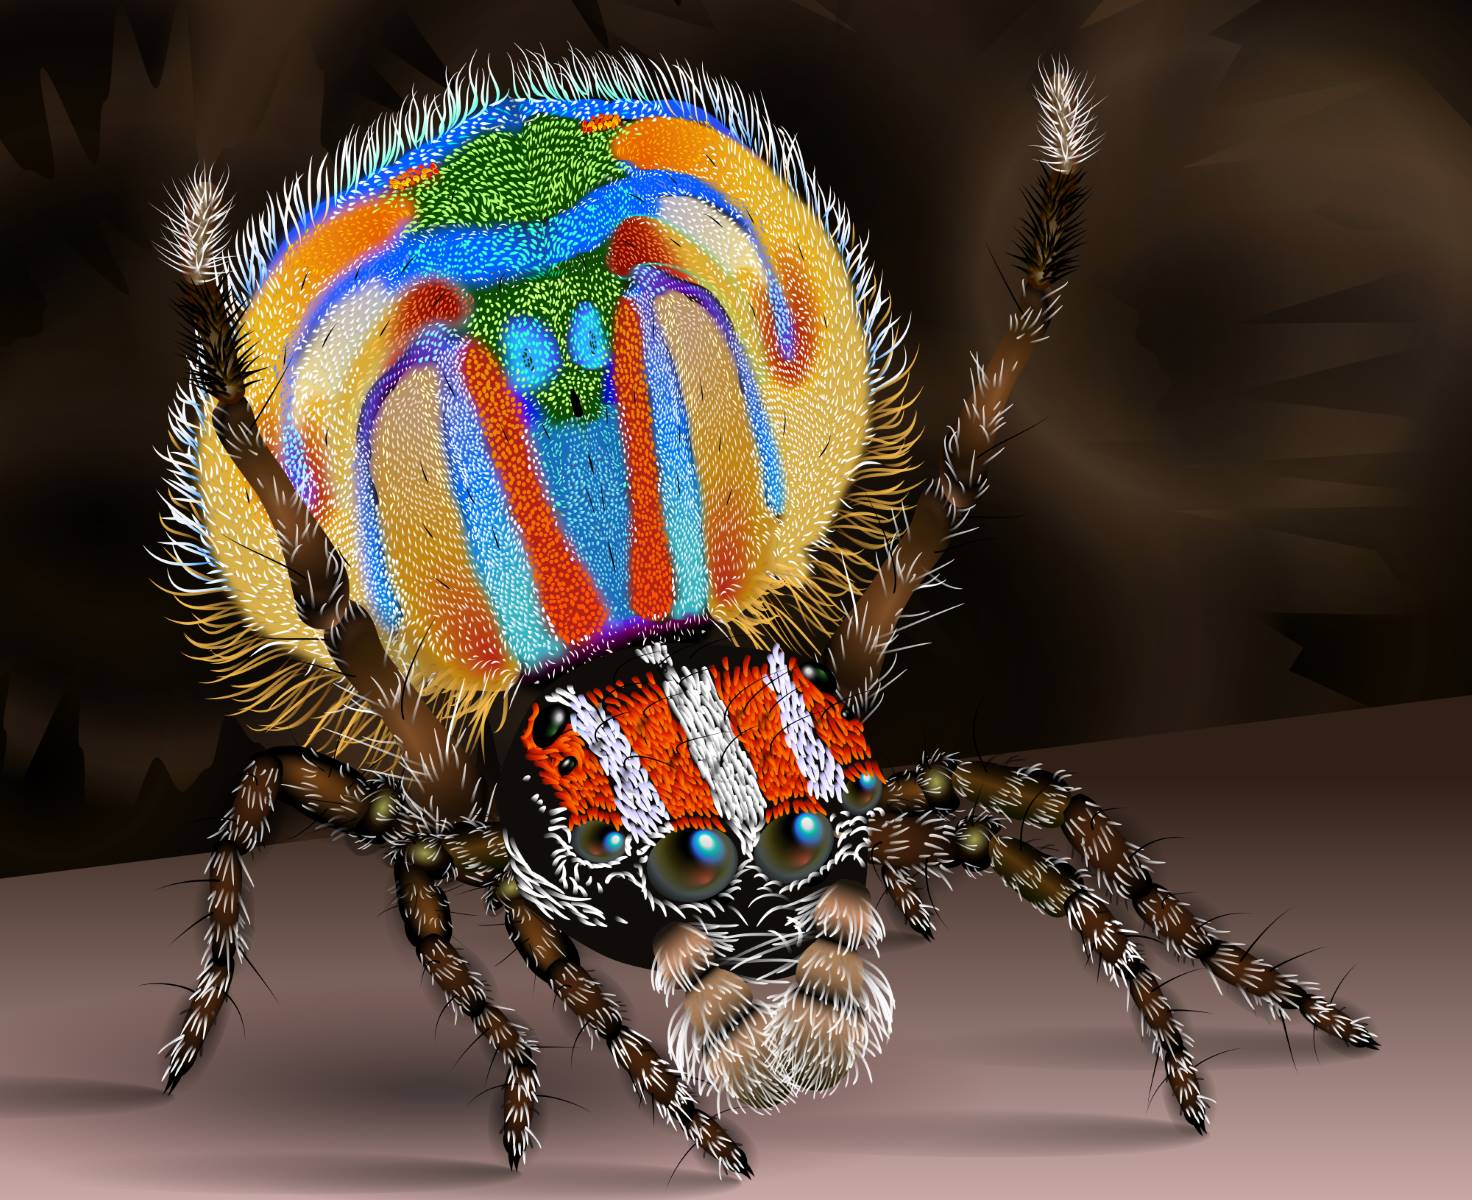 7 new species of peacock spider discovered - Australian Geographic